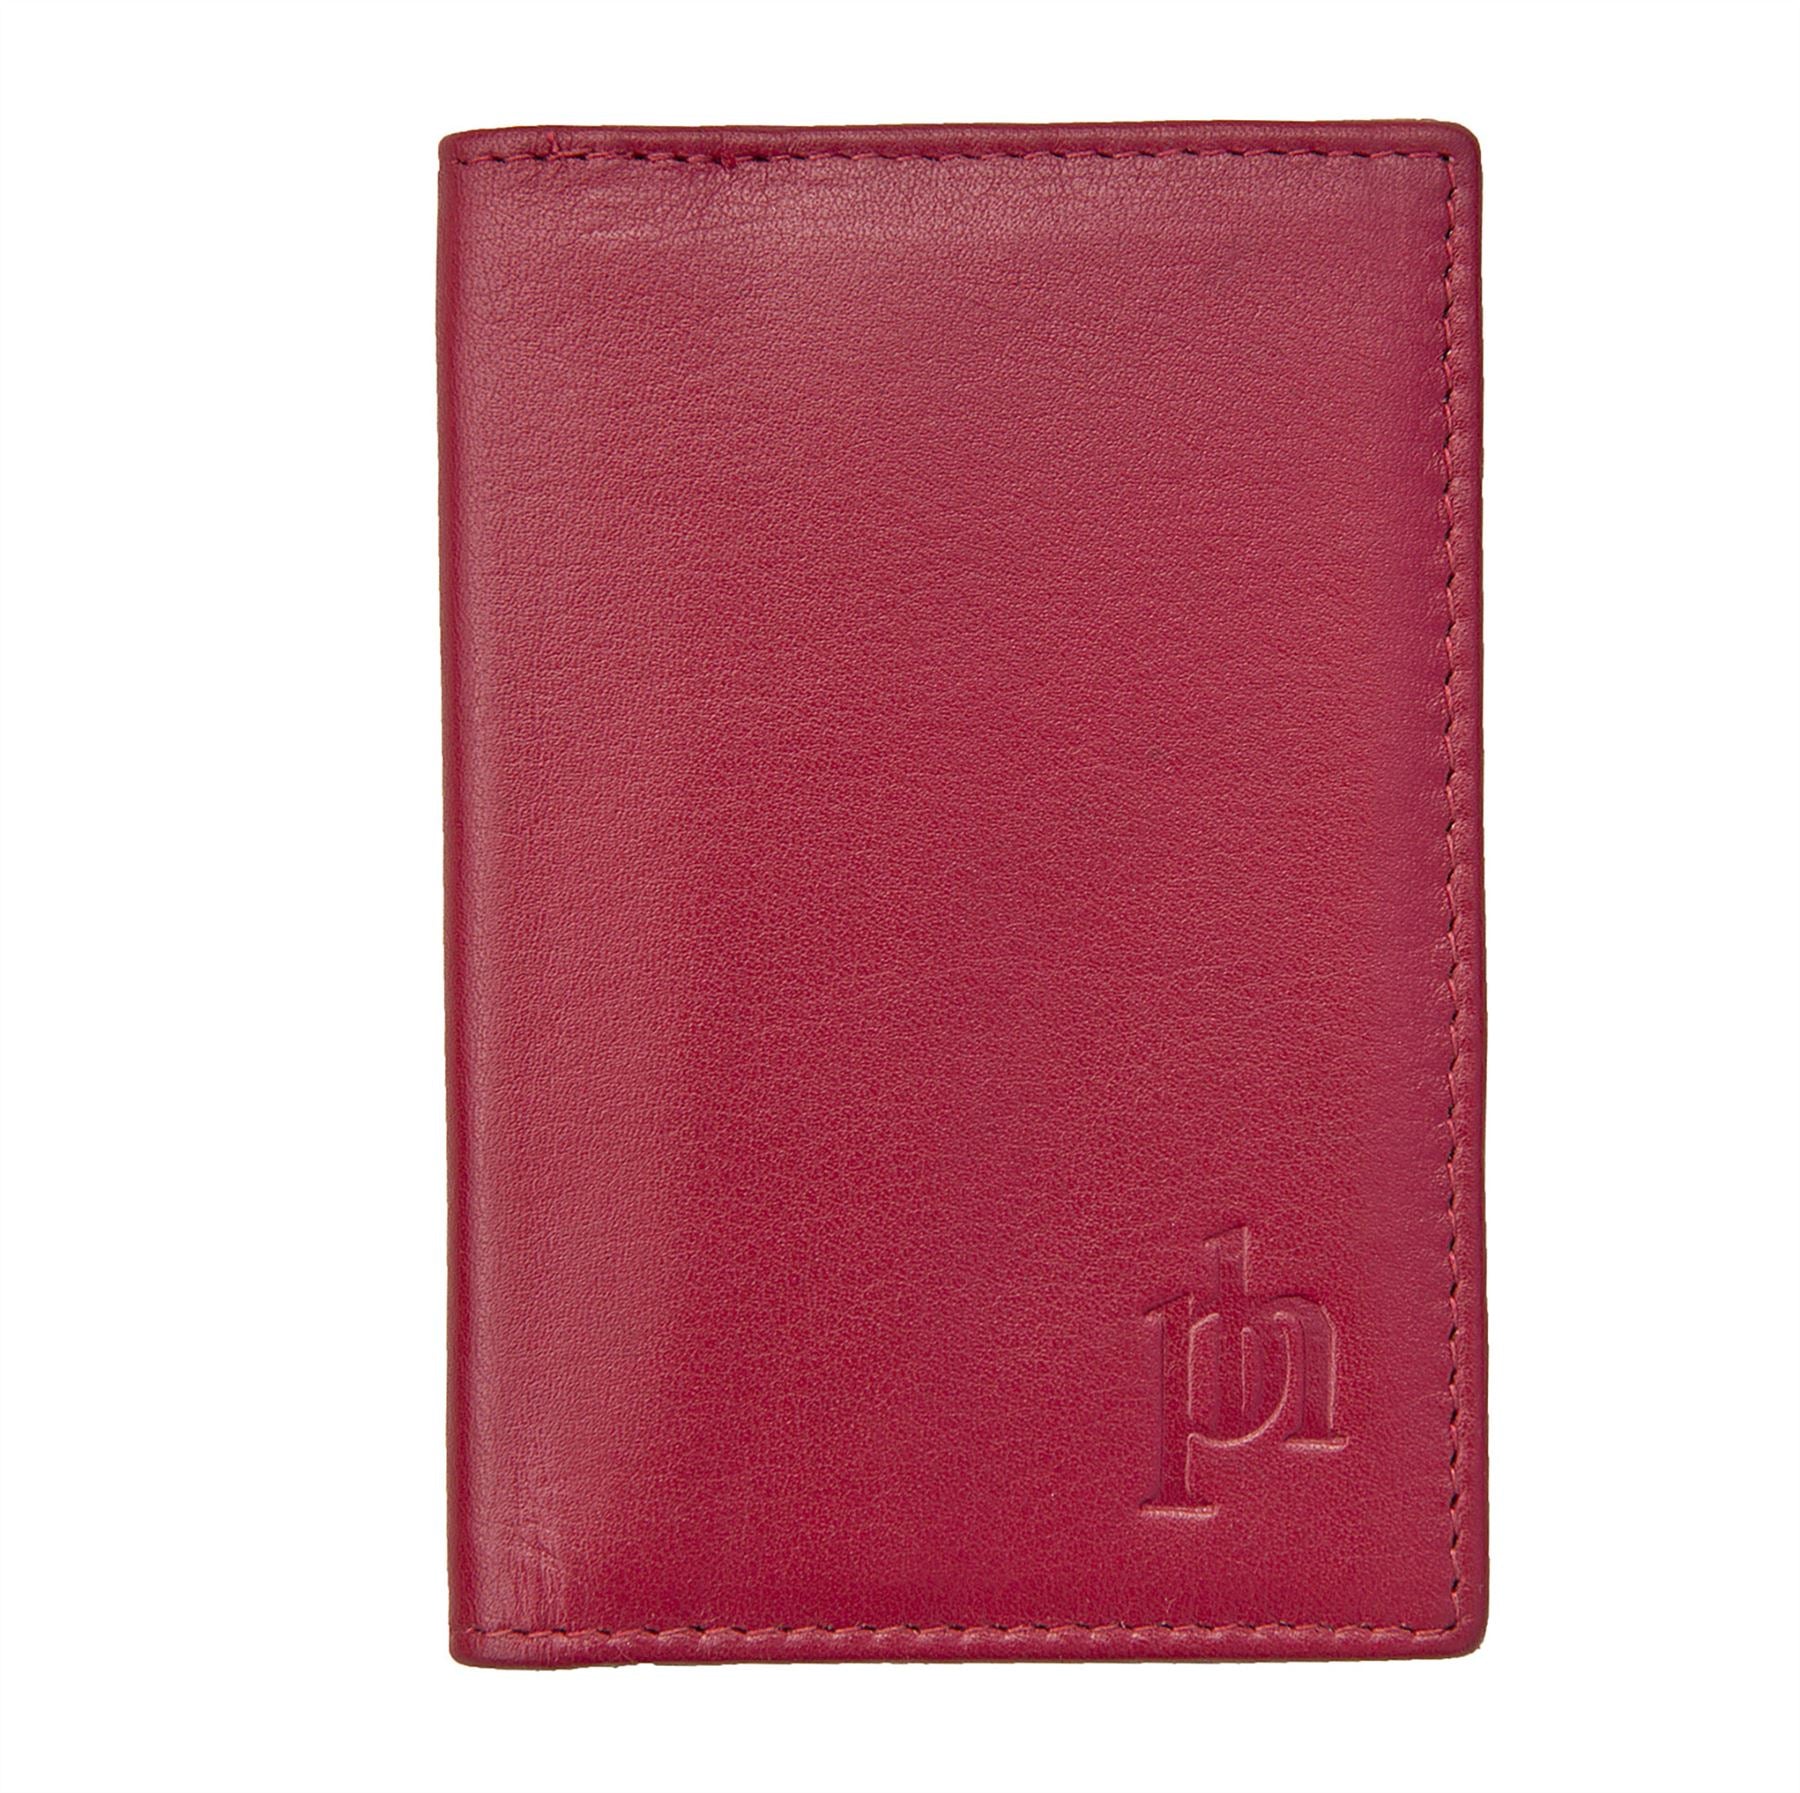 Leather RFID Travelcard/Oyster Credit Card Holder - 710